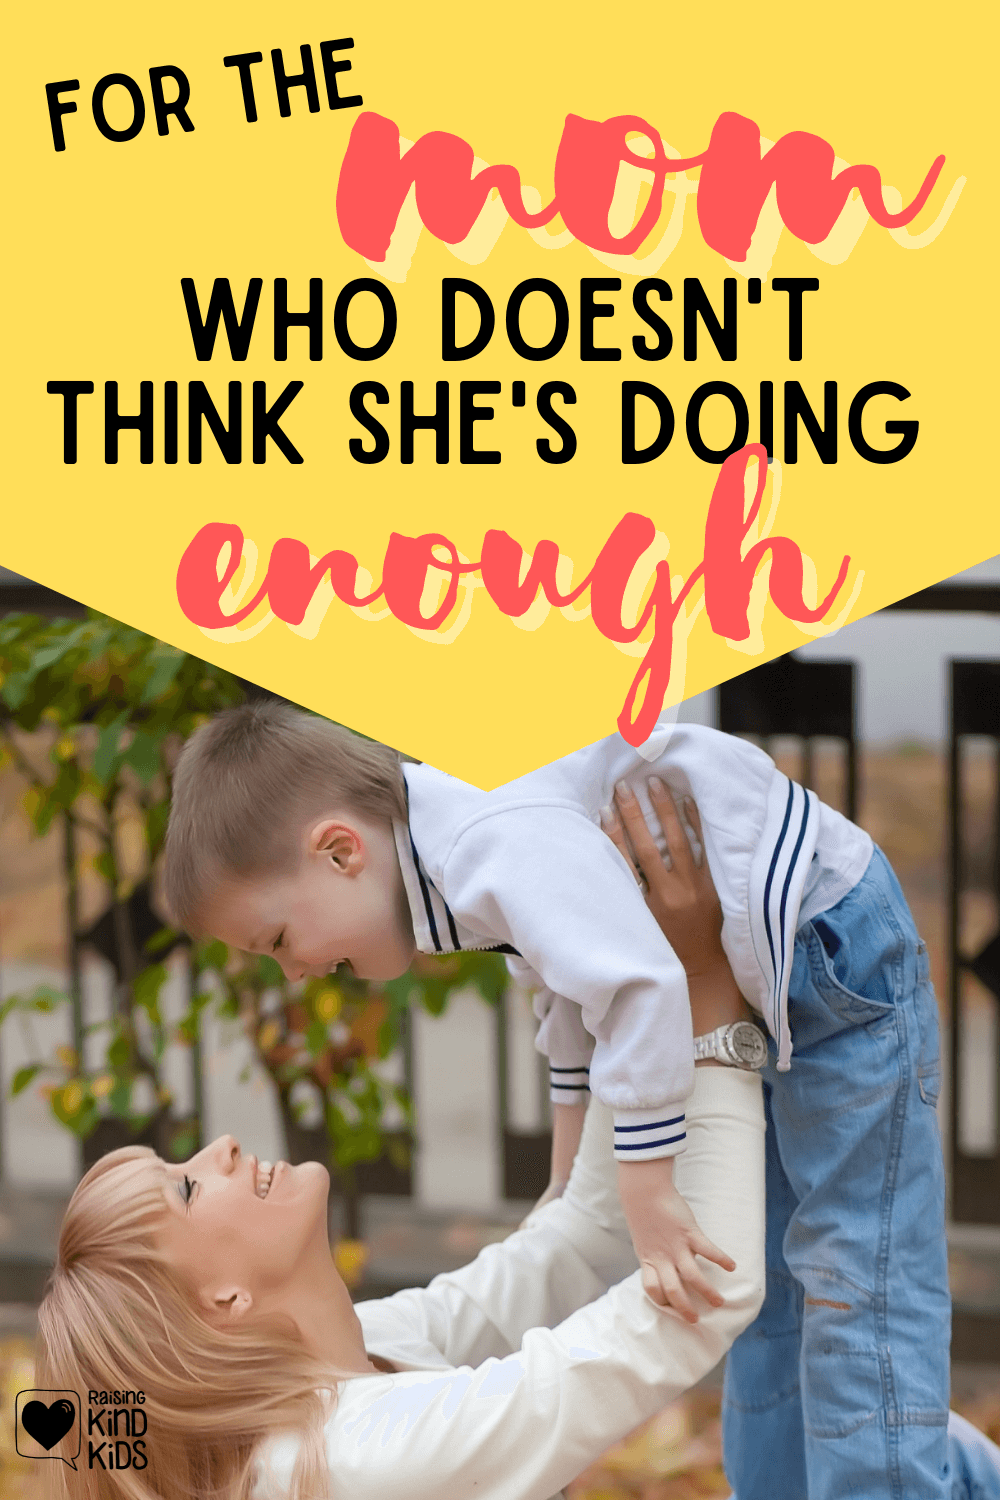 Do you ever feel like you're not doing enough as a mom? This is what all moms need to know when the negative self talk creeps in. #iamenough